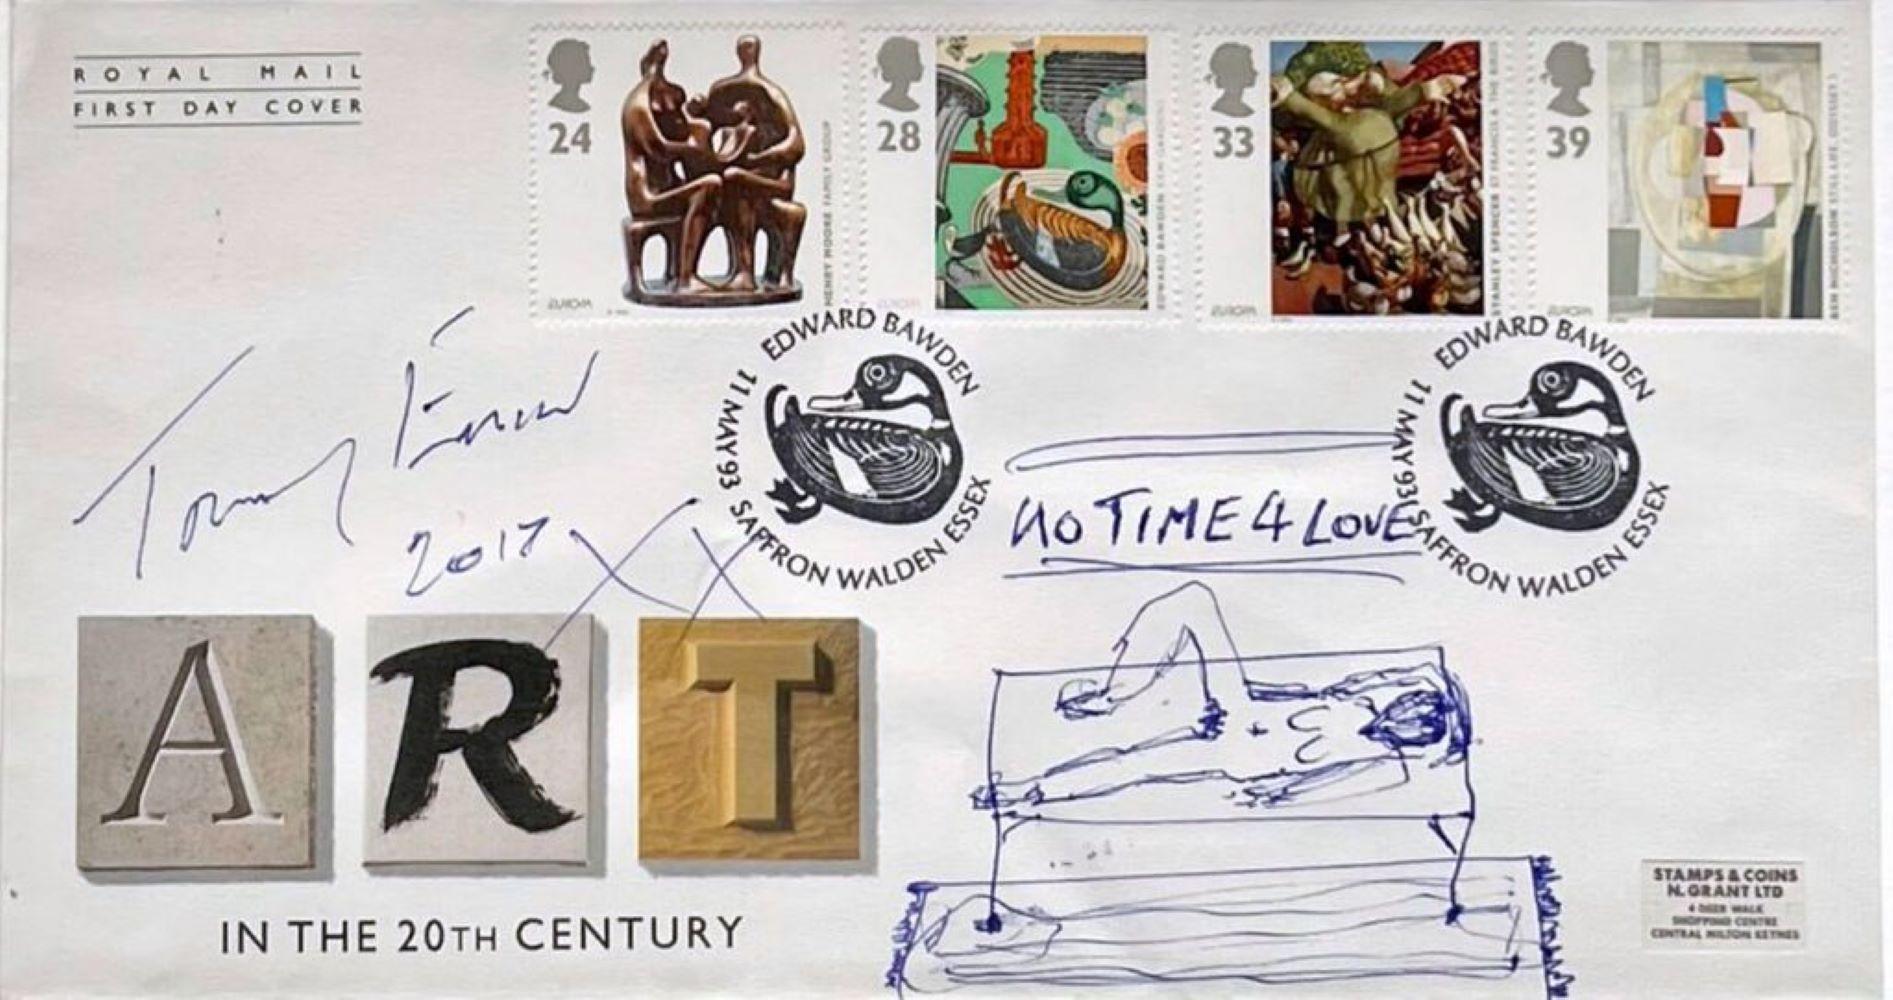 Tracey Emin Figurative Art - No Time 4 Love, original signed & titled ink drawing on Royal Mail 1st Day Cover